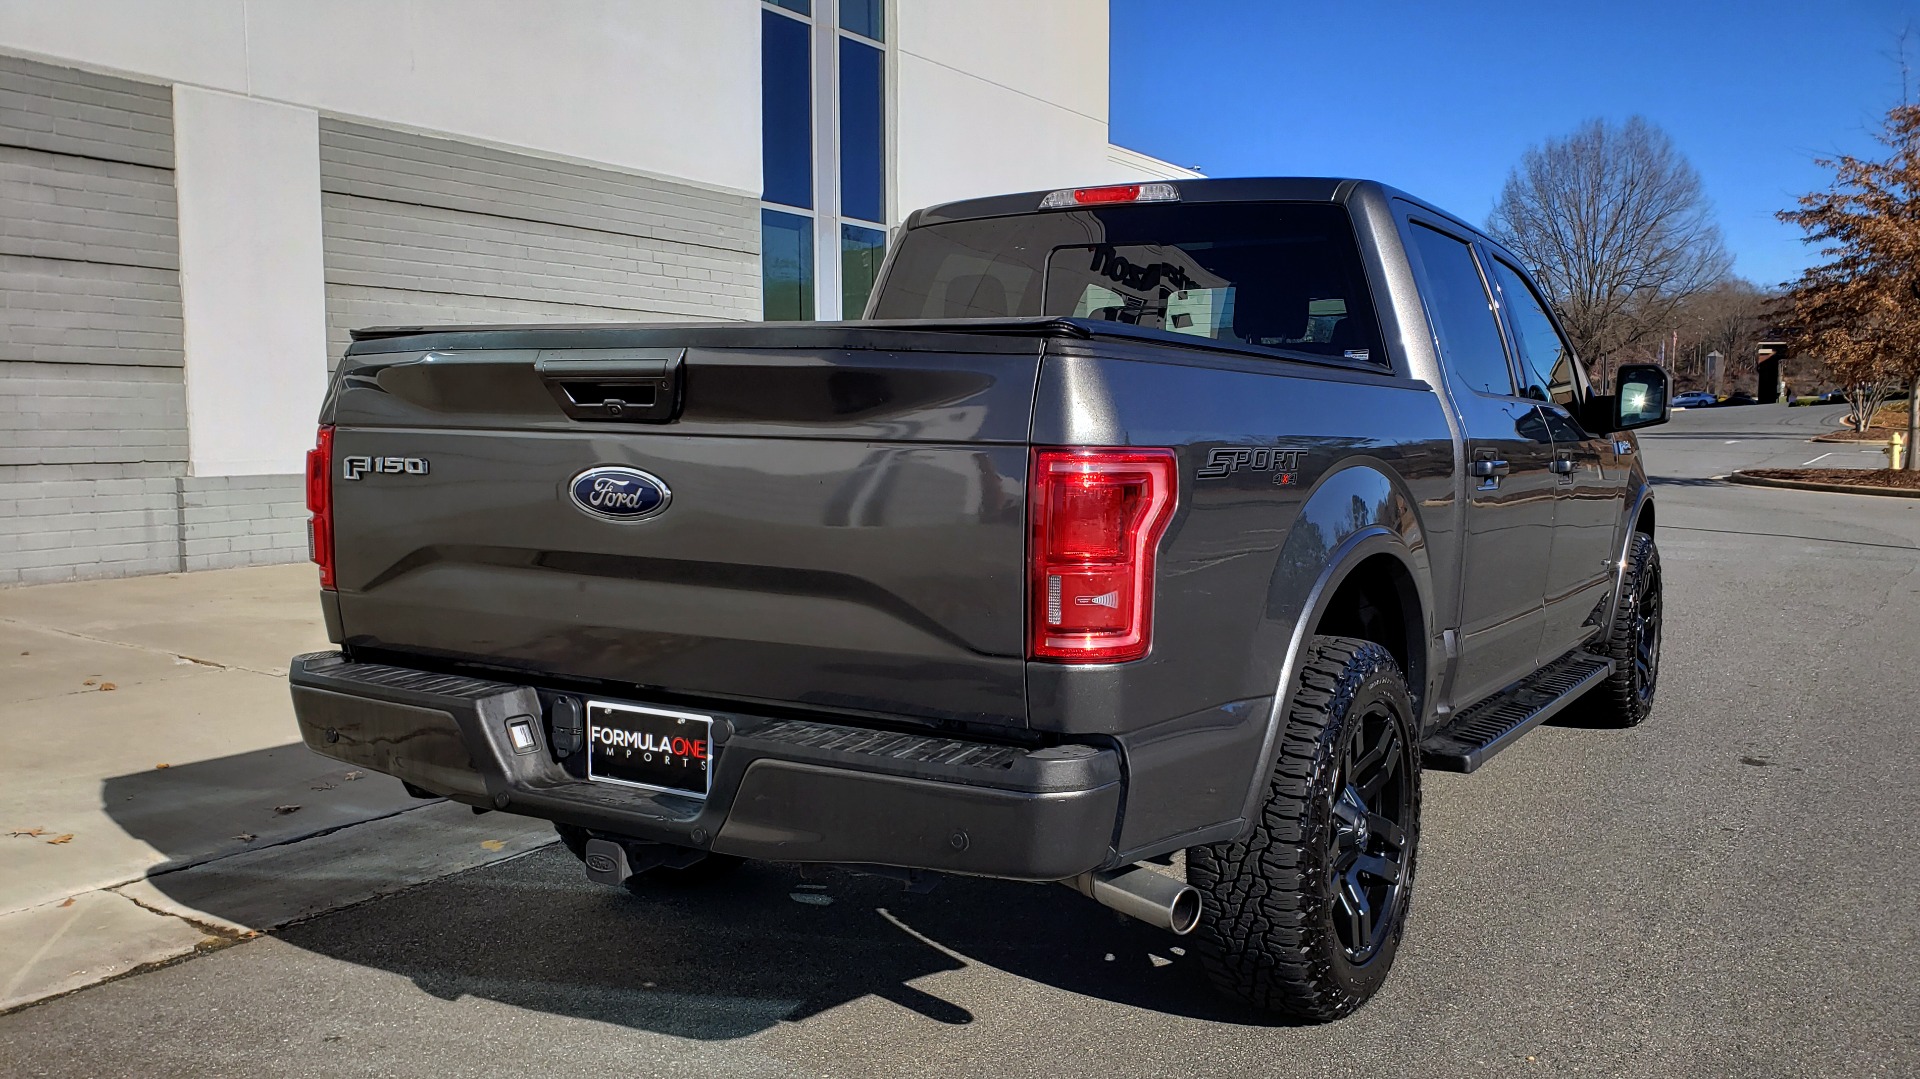 Used 2017 Ford F-150 LARIAT 4X4 SUPERCREW / 3.5L ECOBOOST / 10-SPD AUTO / NAV / SONY / REARVIEW for sale Sold at Formula Imports in Charlotte NC 28227 9